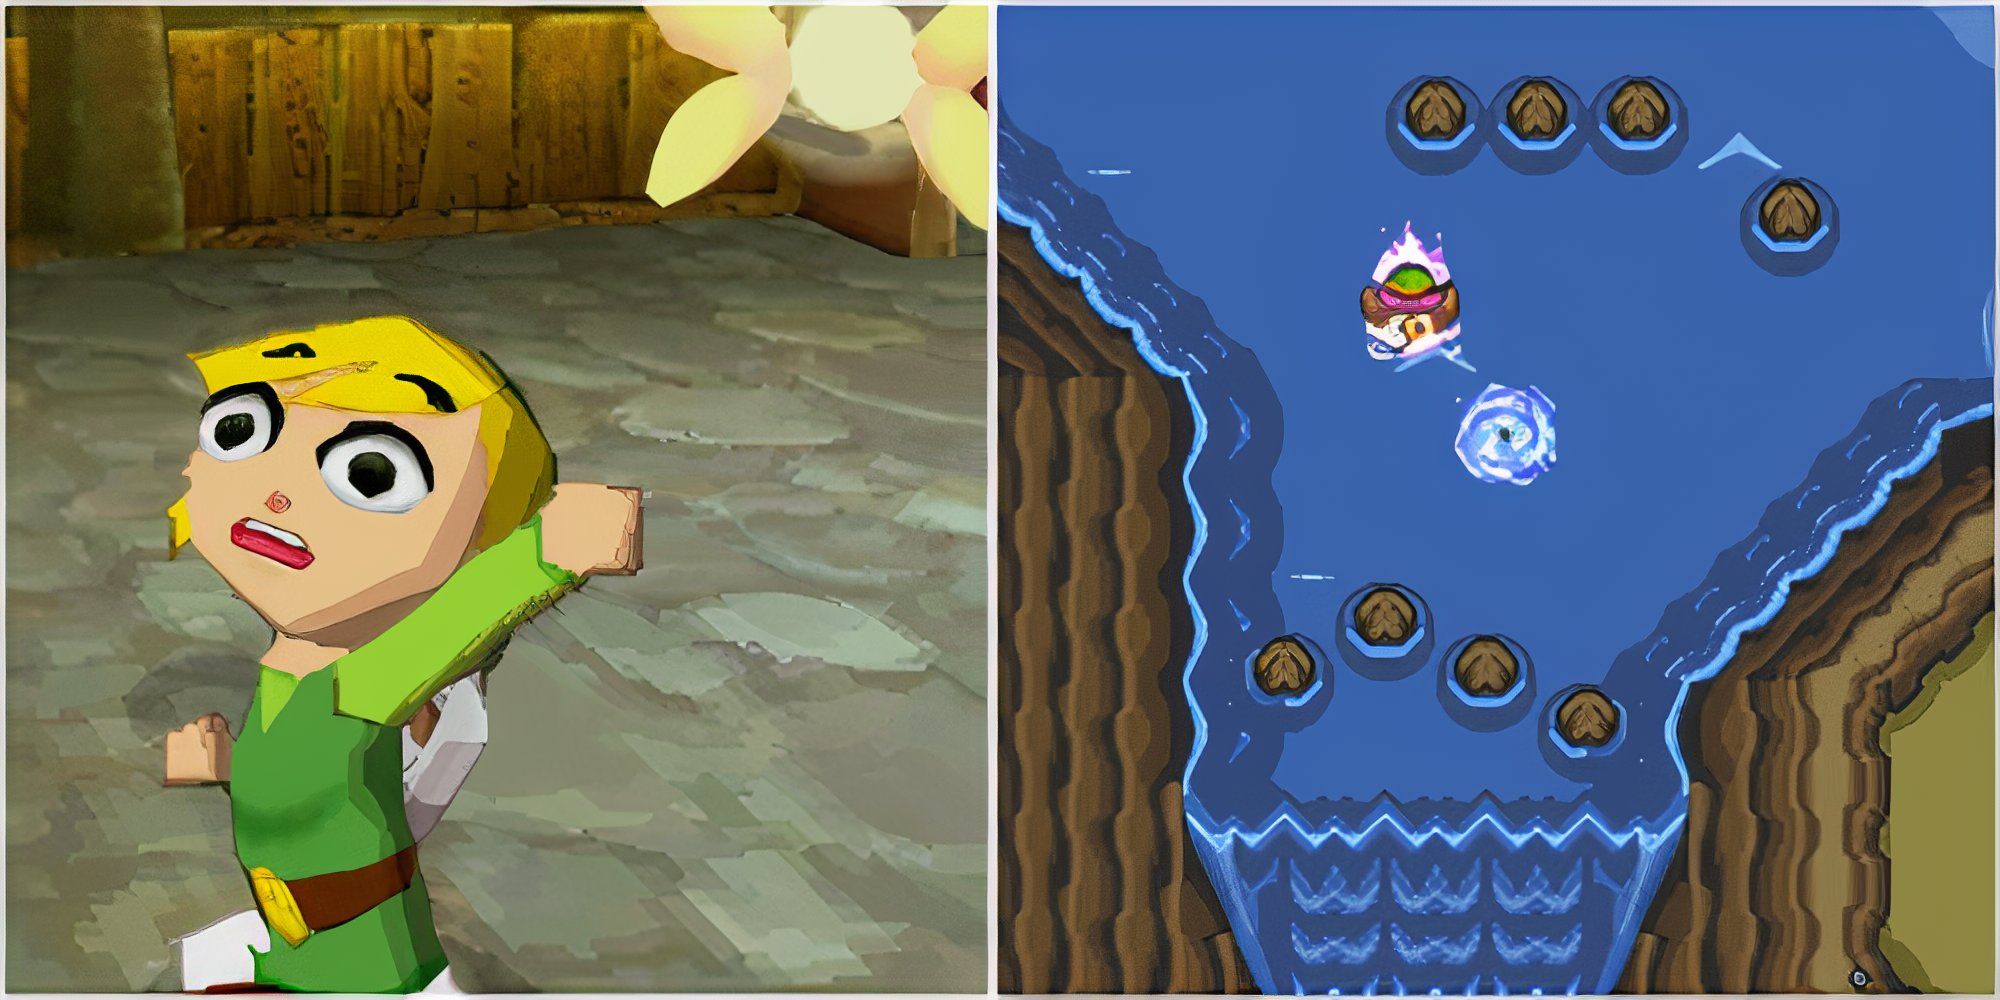 A scene featuring characters in The Legend of Zelda Phantom Hourglass and Swimming in The Legend of Zelda A Link to the Past